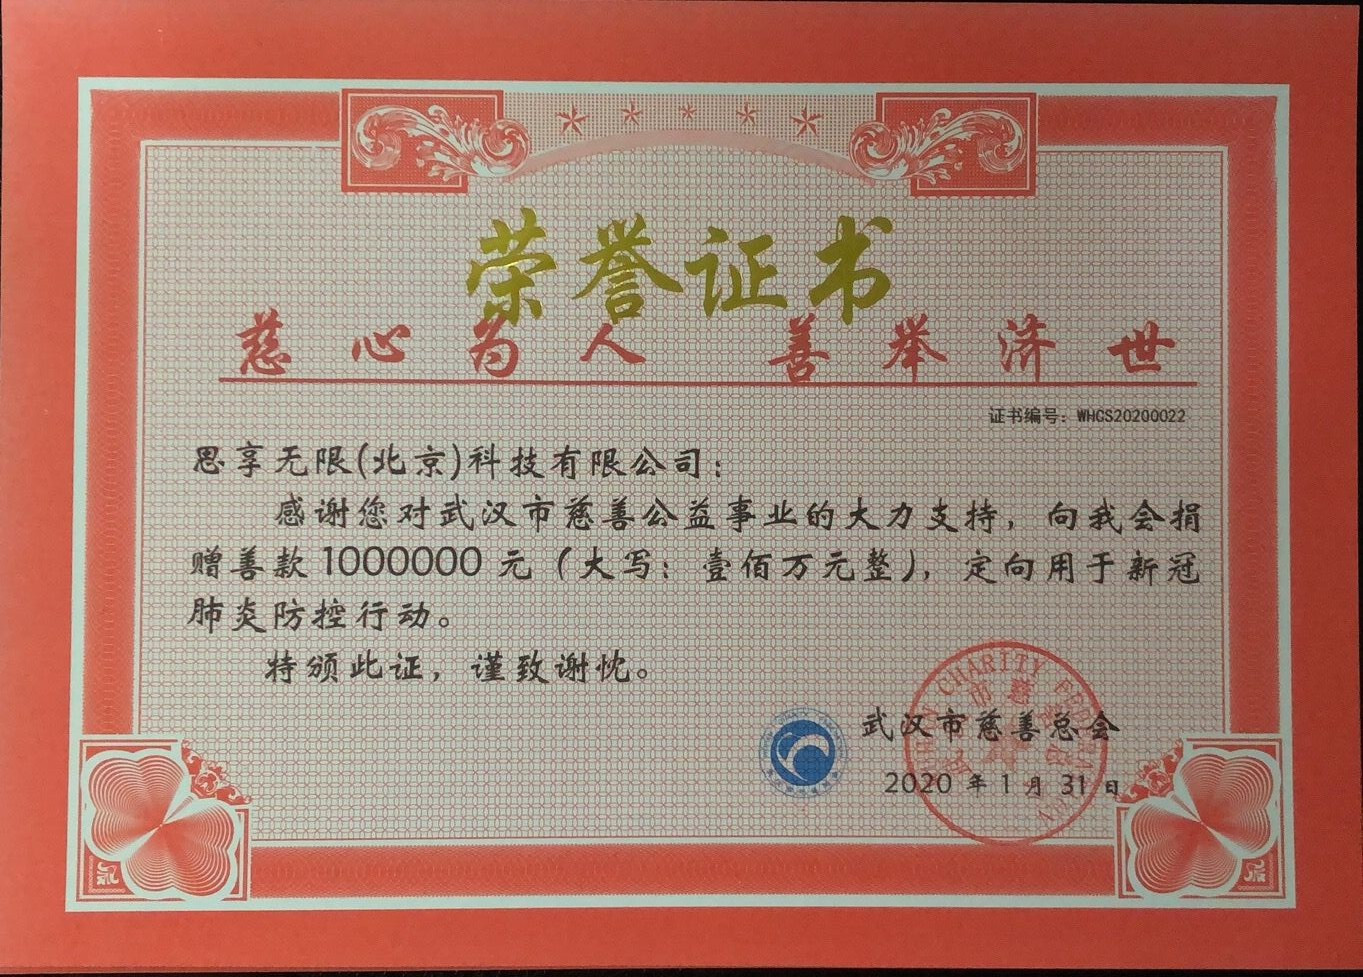                             Wuhan COVID-19 Prevention and Control Action Donation Certificate
                        